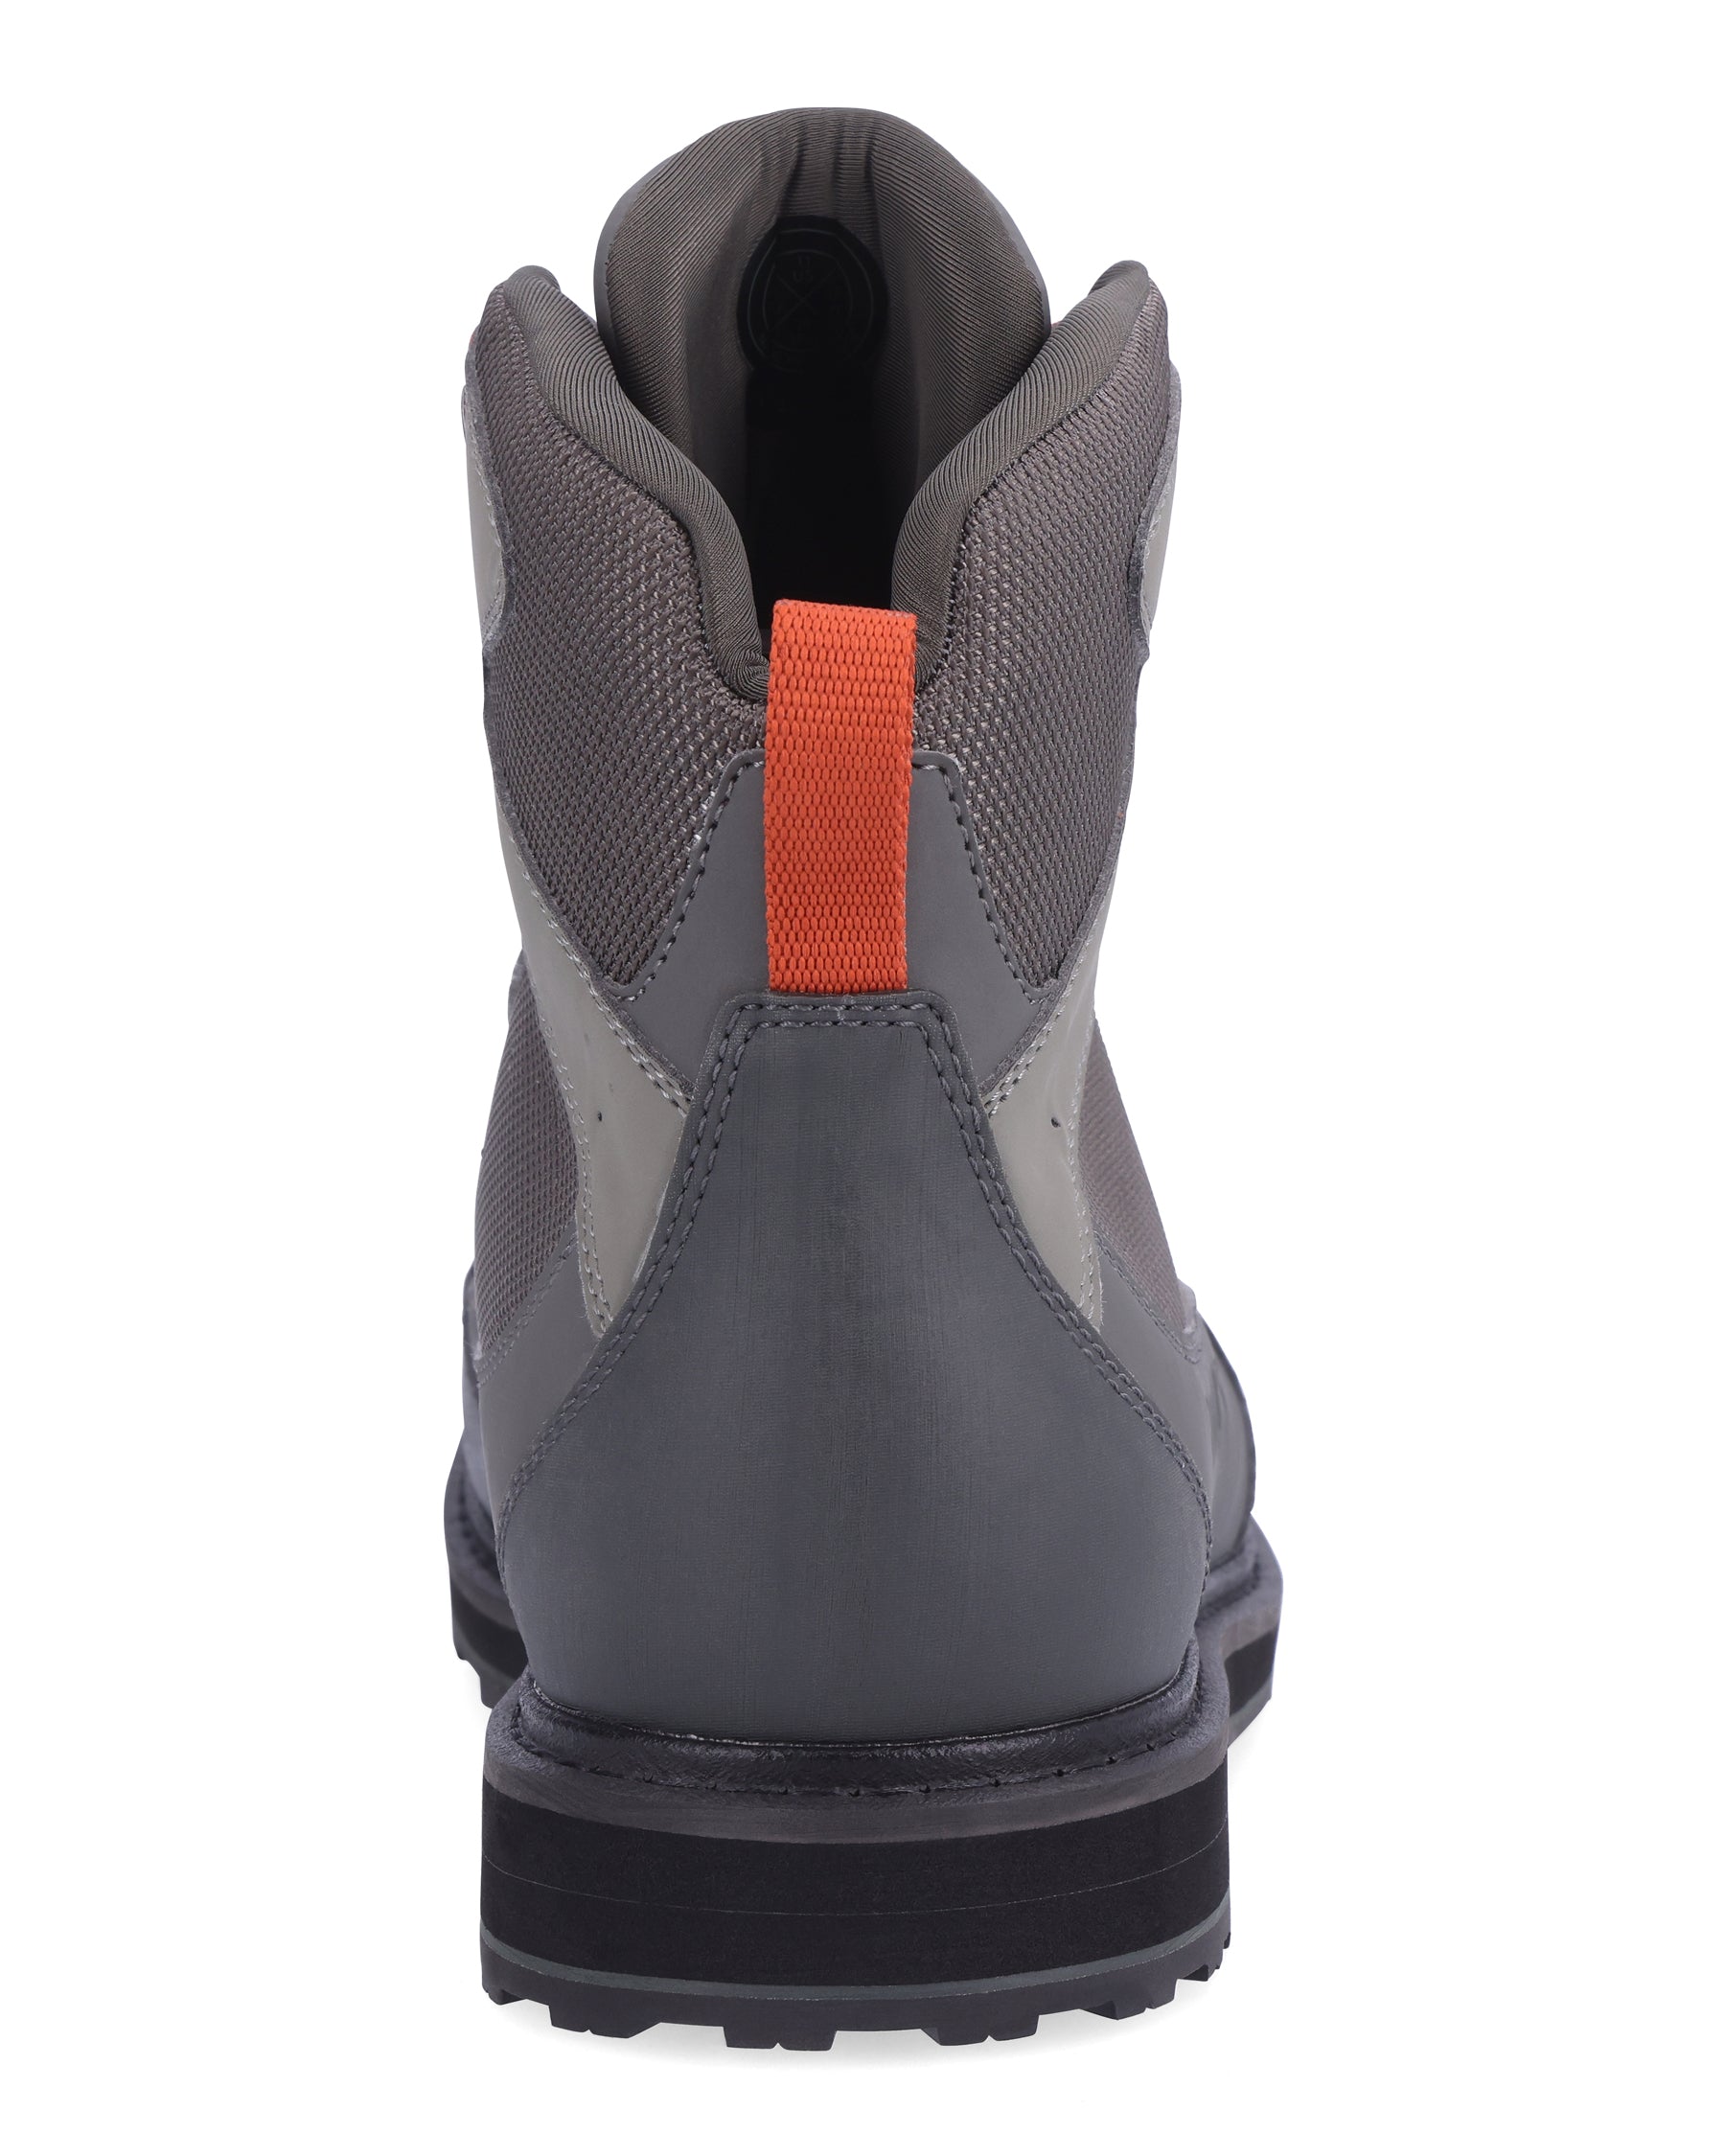 Simms M's Tributary (23) Boot Rubber